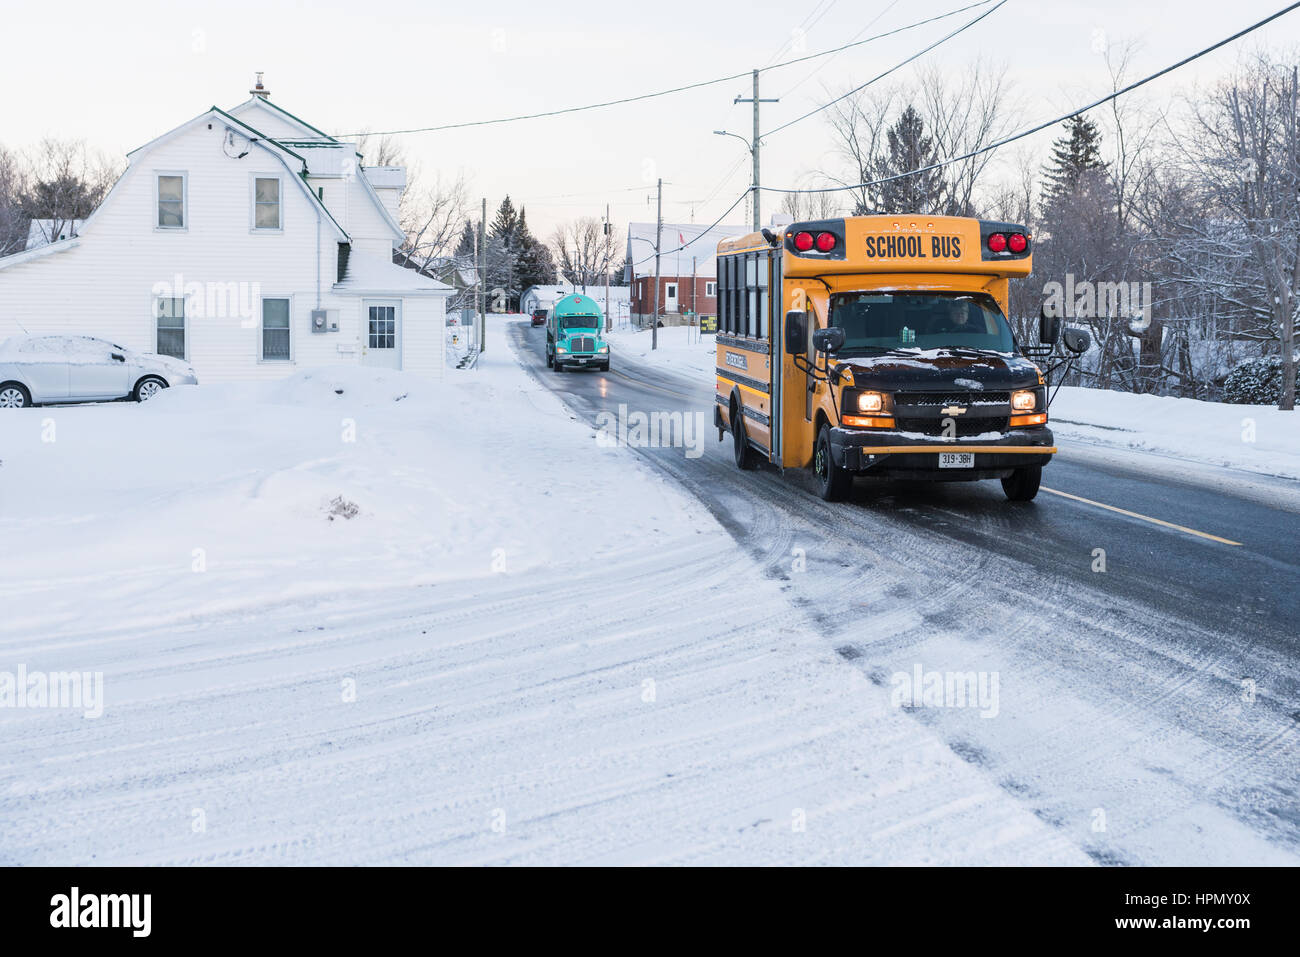 Moose Creek, Canada - January 30, 2017: School bus stopping to let children off after a day at school on a snowy day in a small country town. Stock Photo